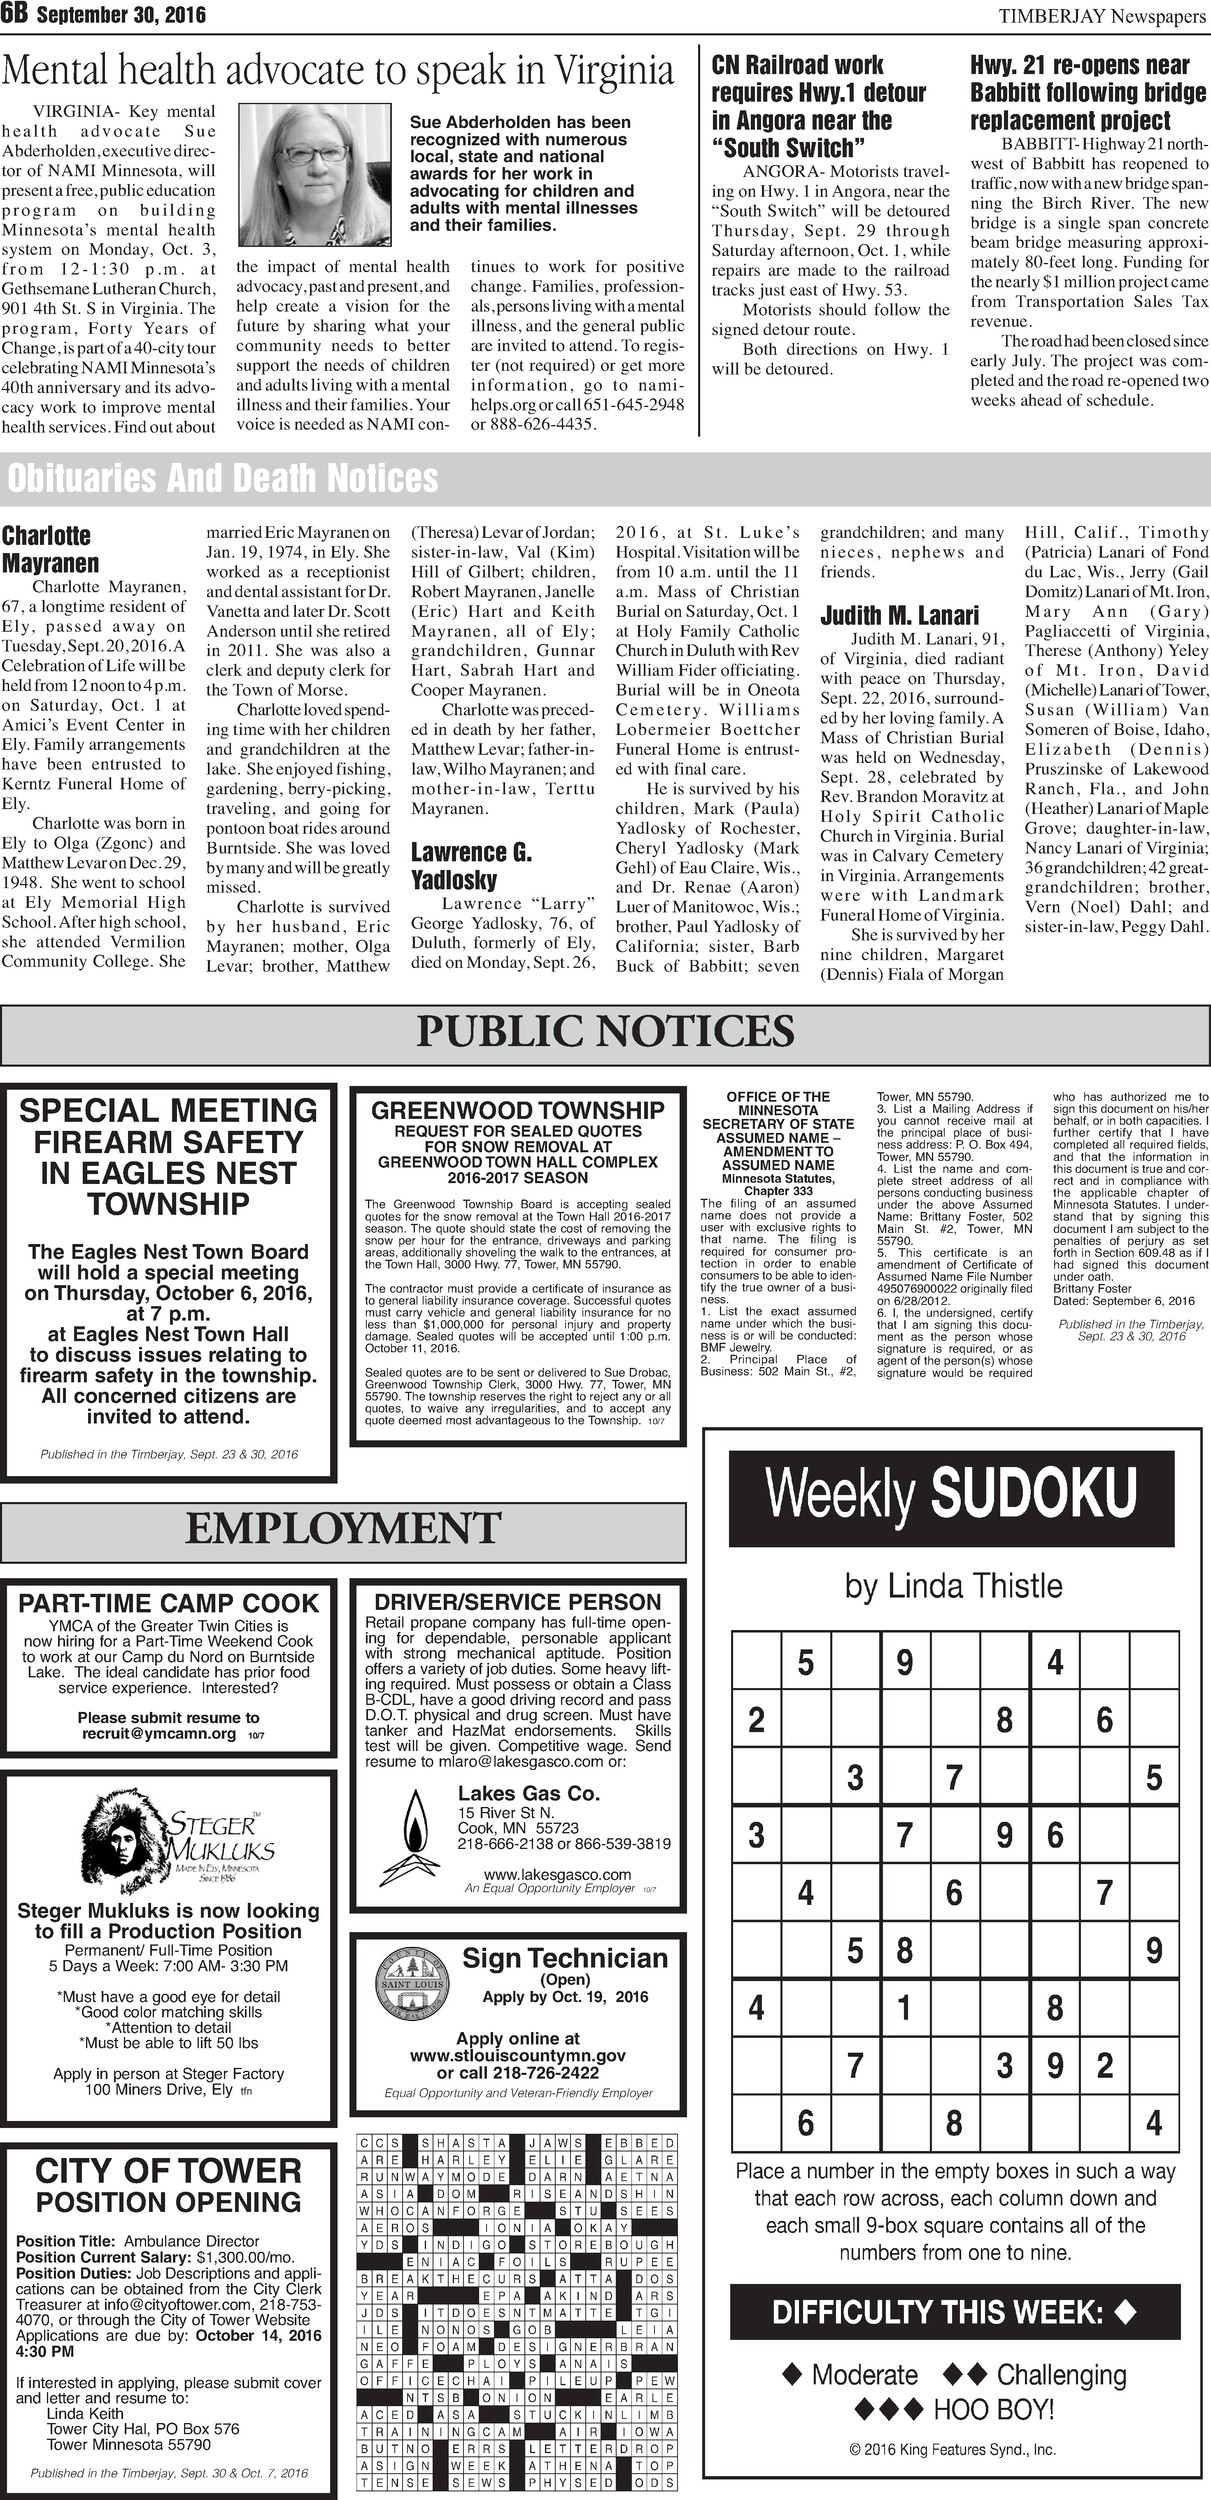 Click here to read the legal notices and classifieds on page B6